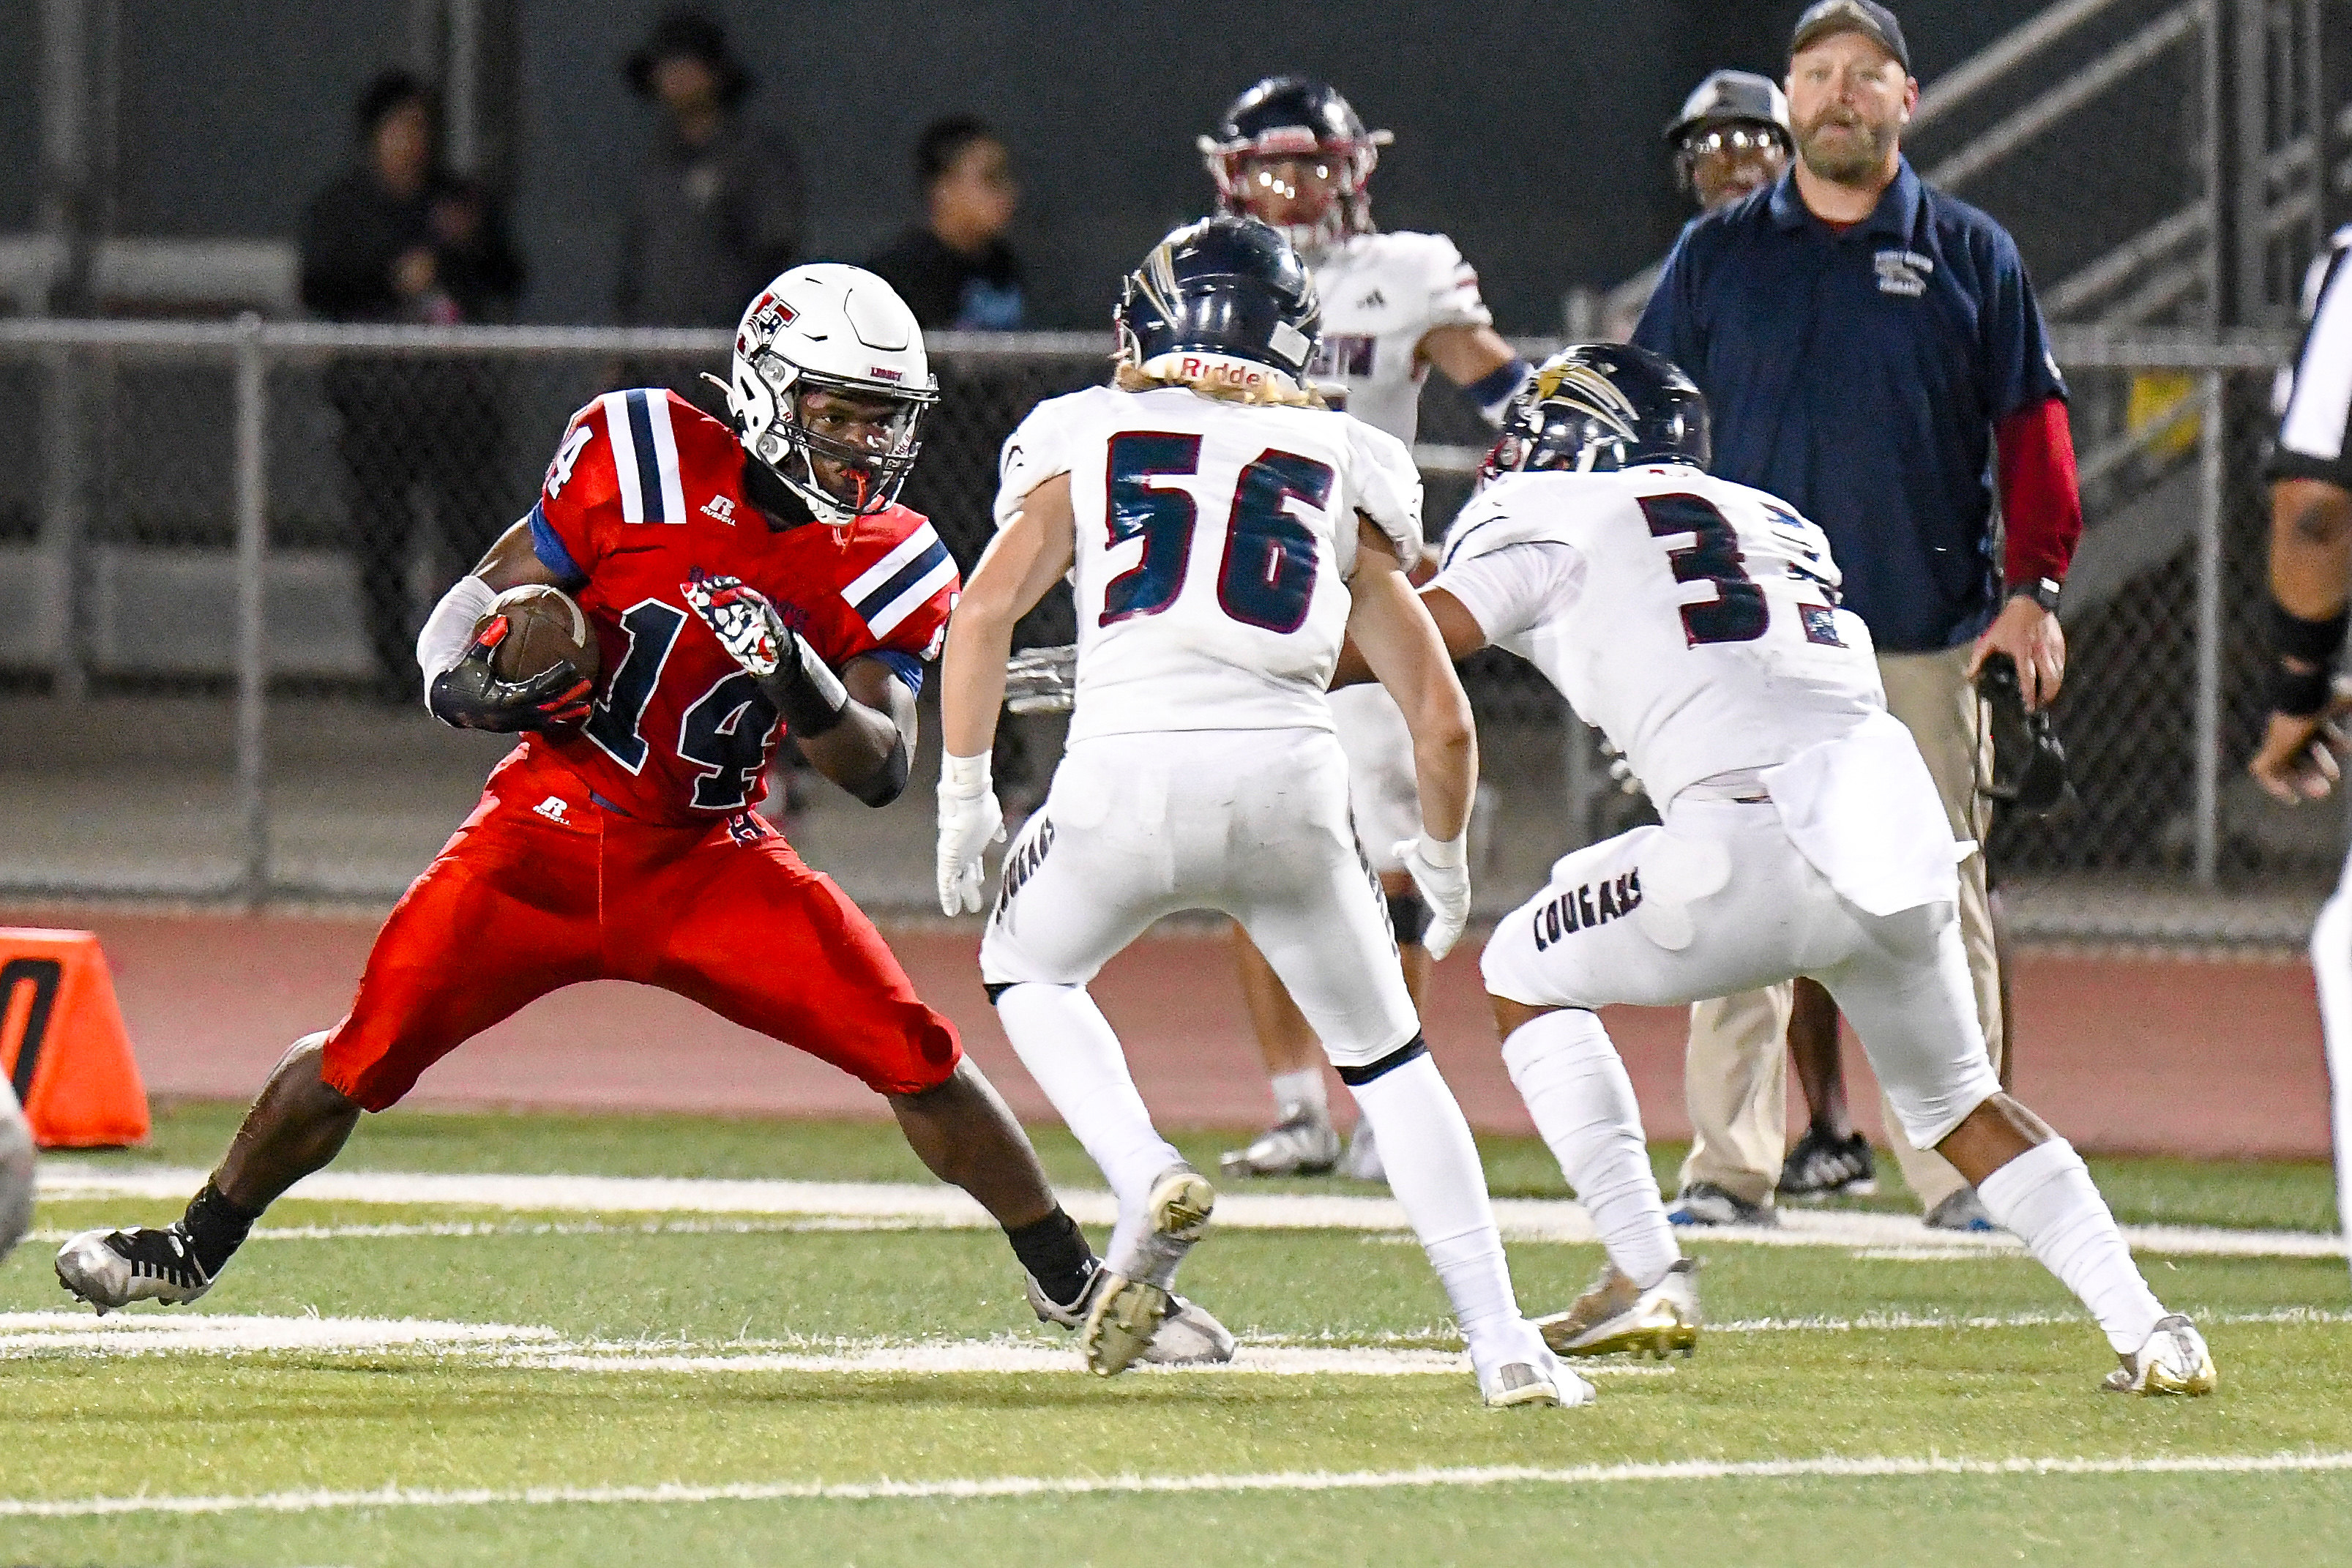 Heritage falls behind early, loses to Steele Canyon | Menifee 24/7